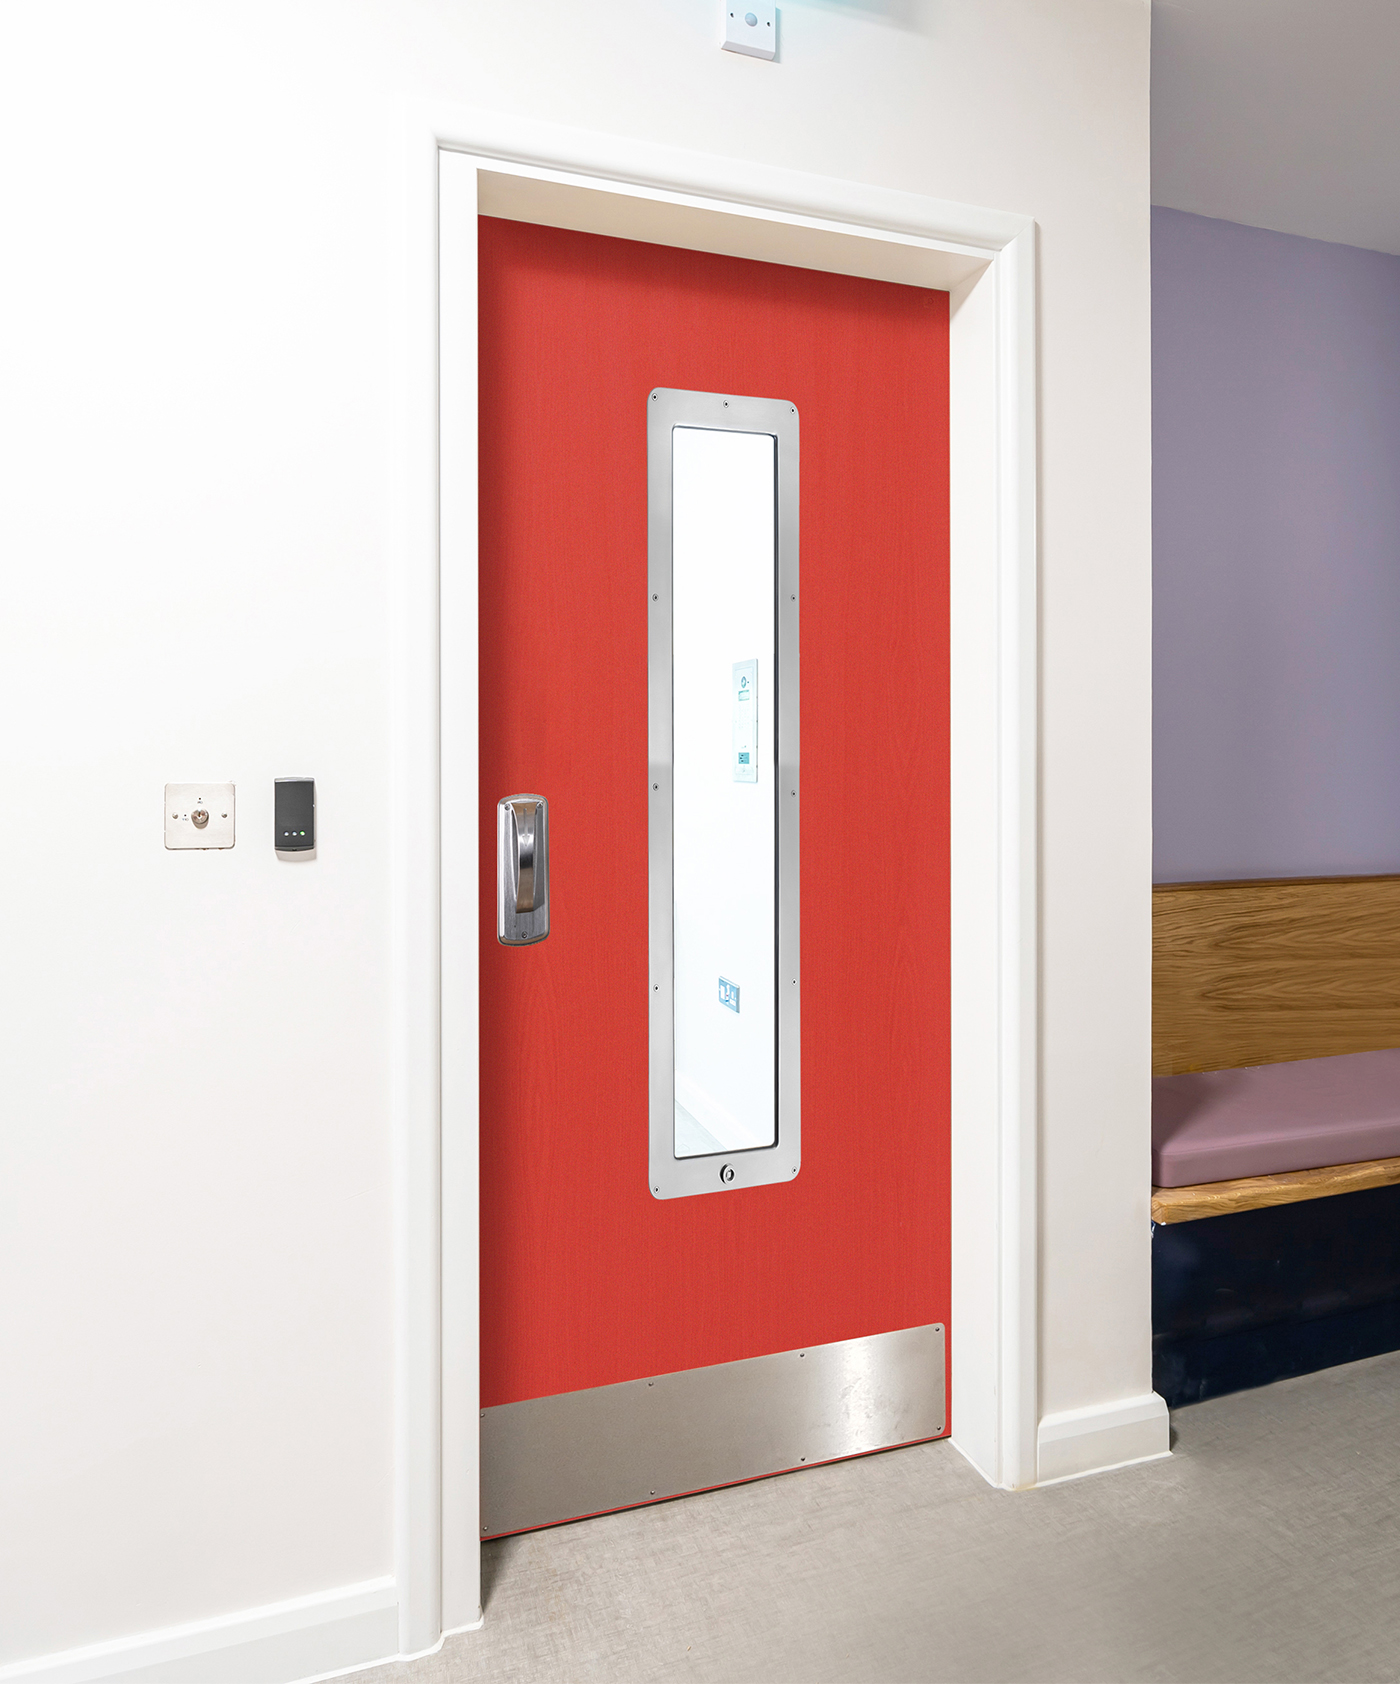 The SOLO Single-Action Ligature-Resistant Door System improves patient safety in behavioral healthcare.